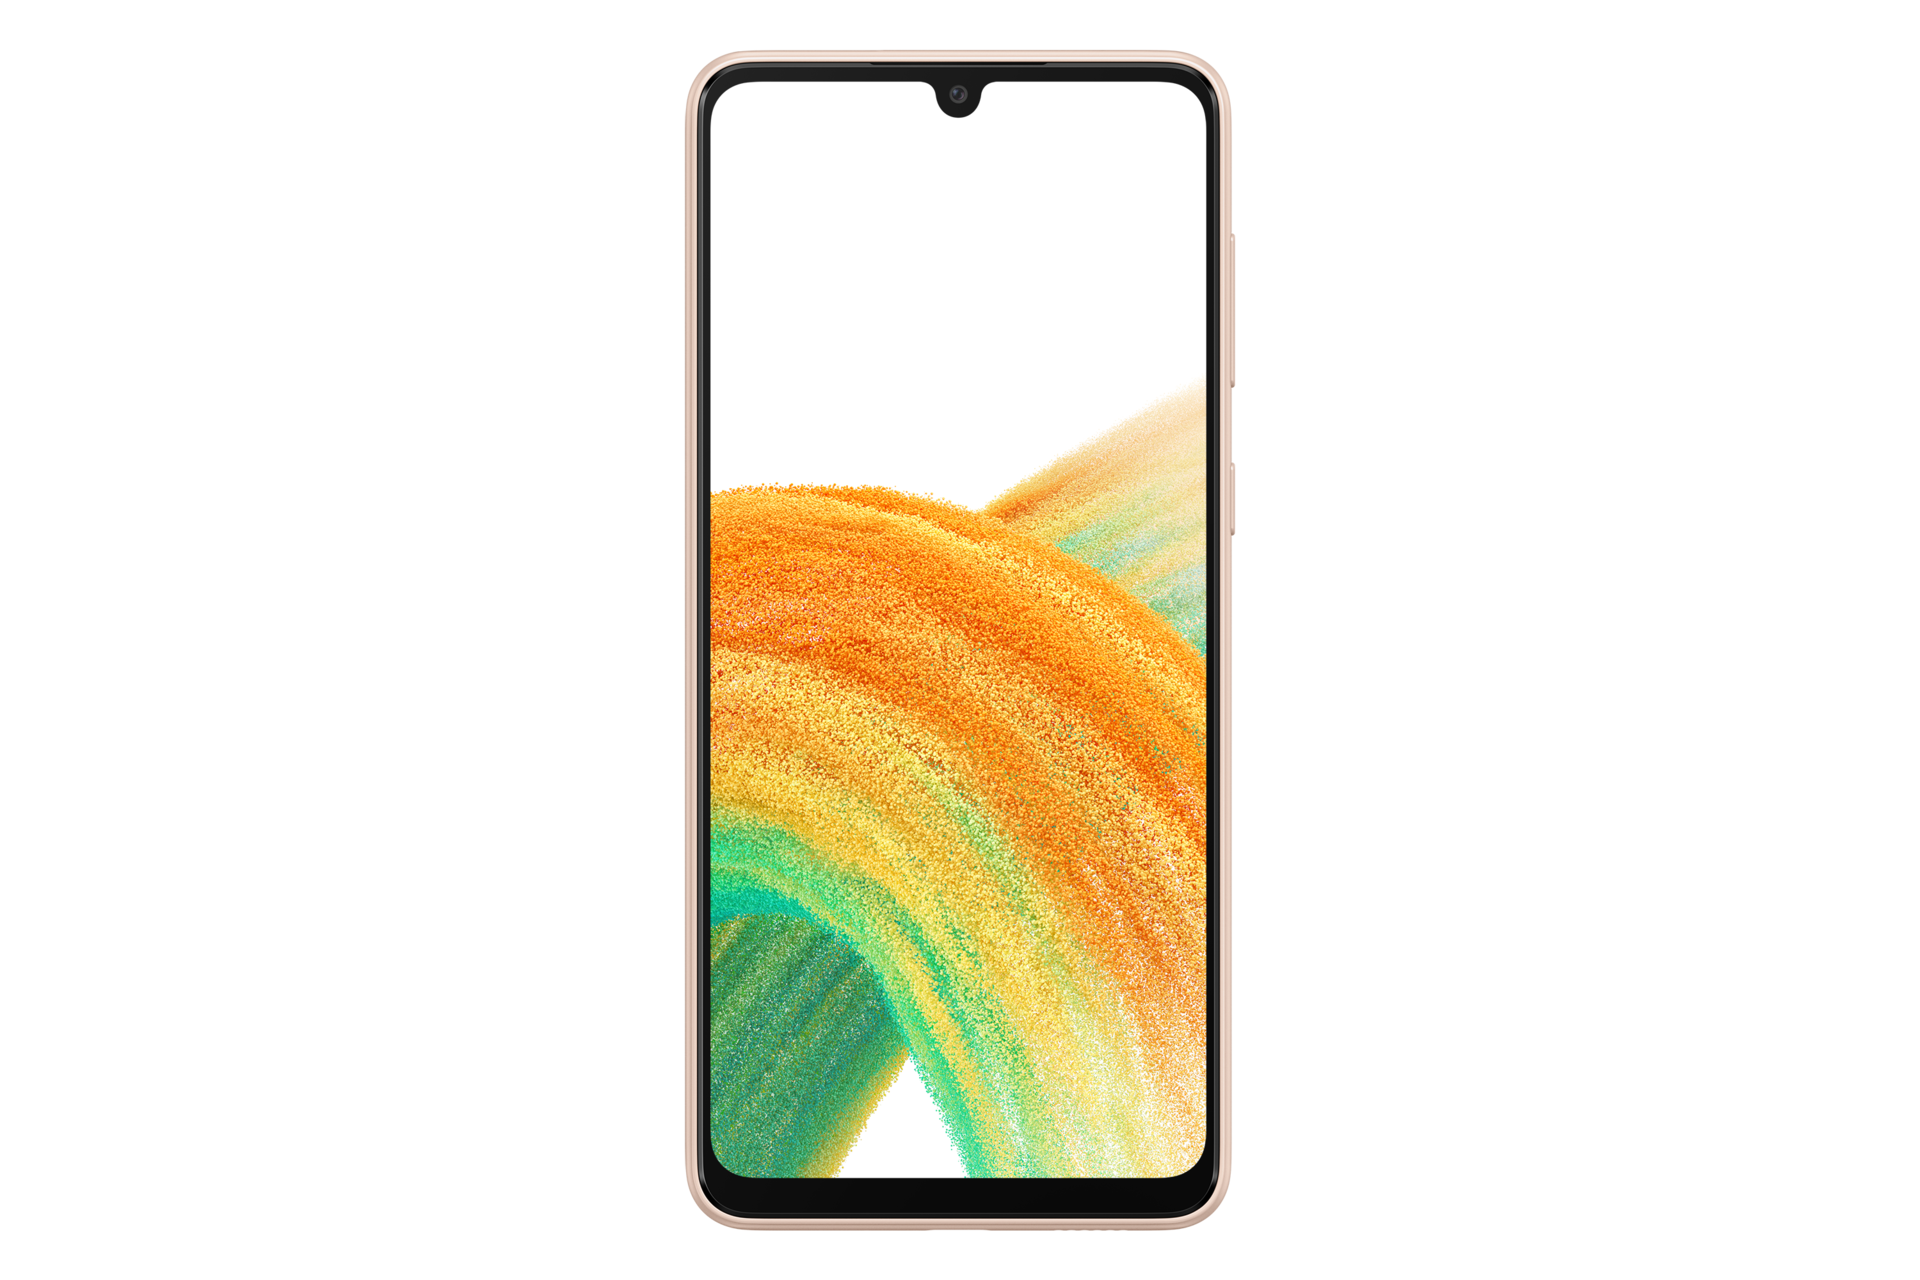 Galaxy A33 5G in Awesome Peach seen from the front with a colorful wallpaper onscreen. It spins slowly, showing the display, then the smooth rounded side of the phone with the SIM tray, then the matte finish and the minimal camera housing on the rear and comes to a stop at the front view again.